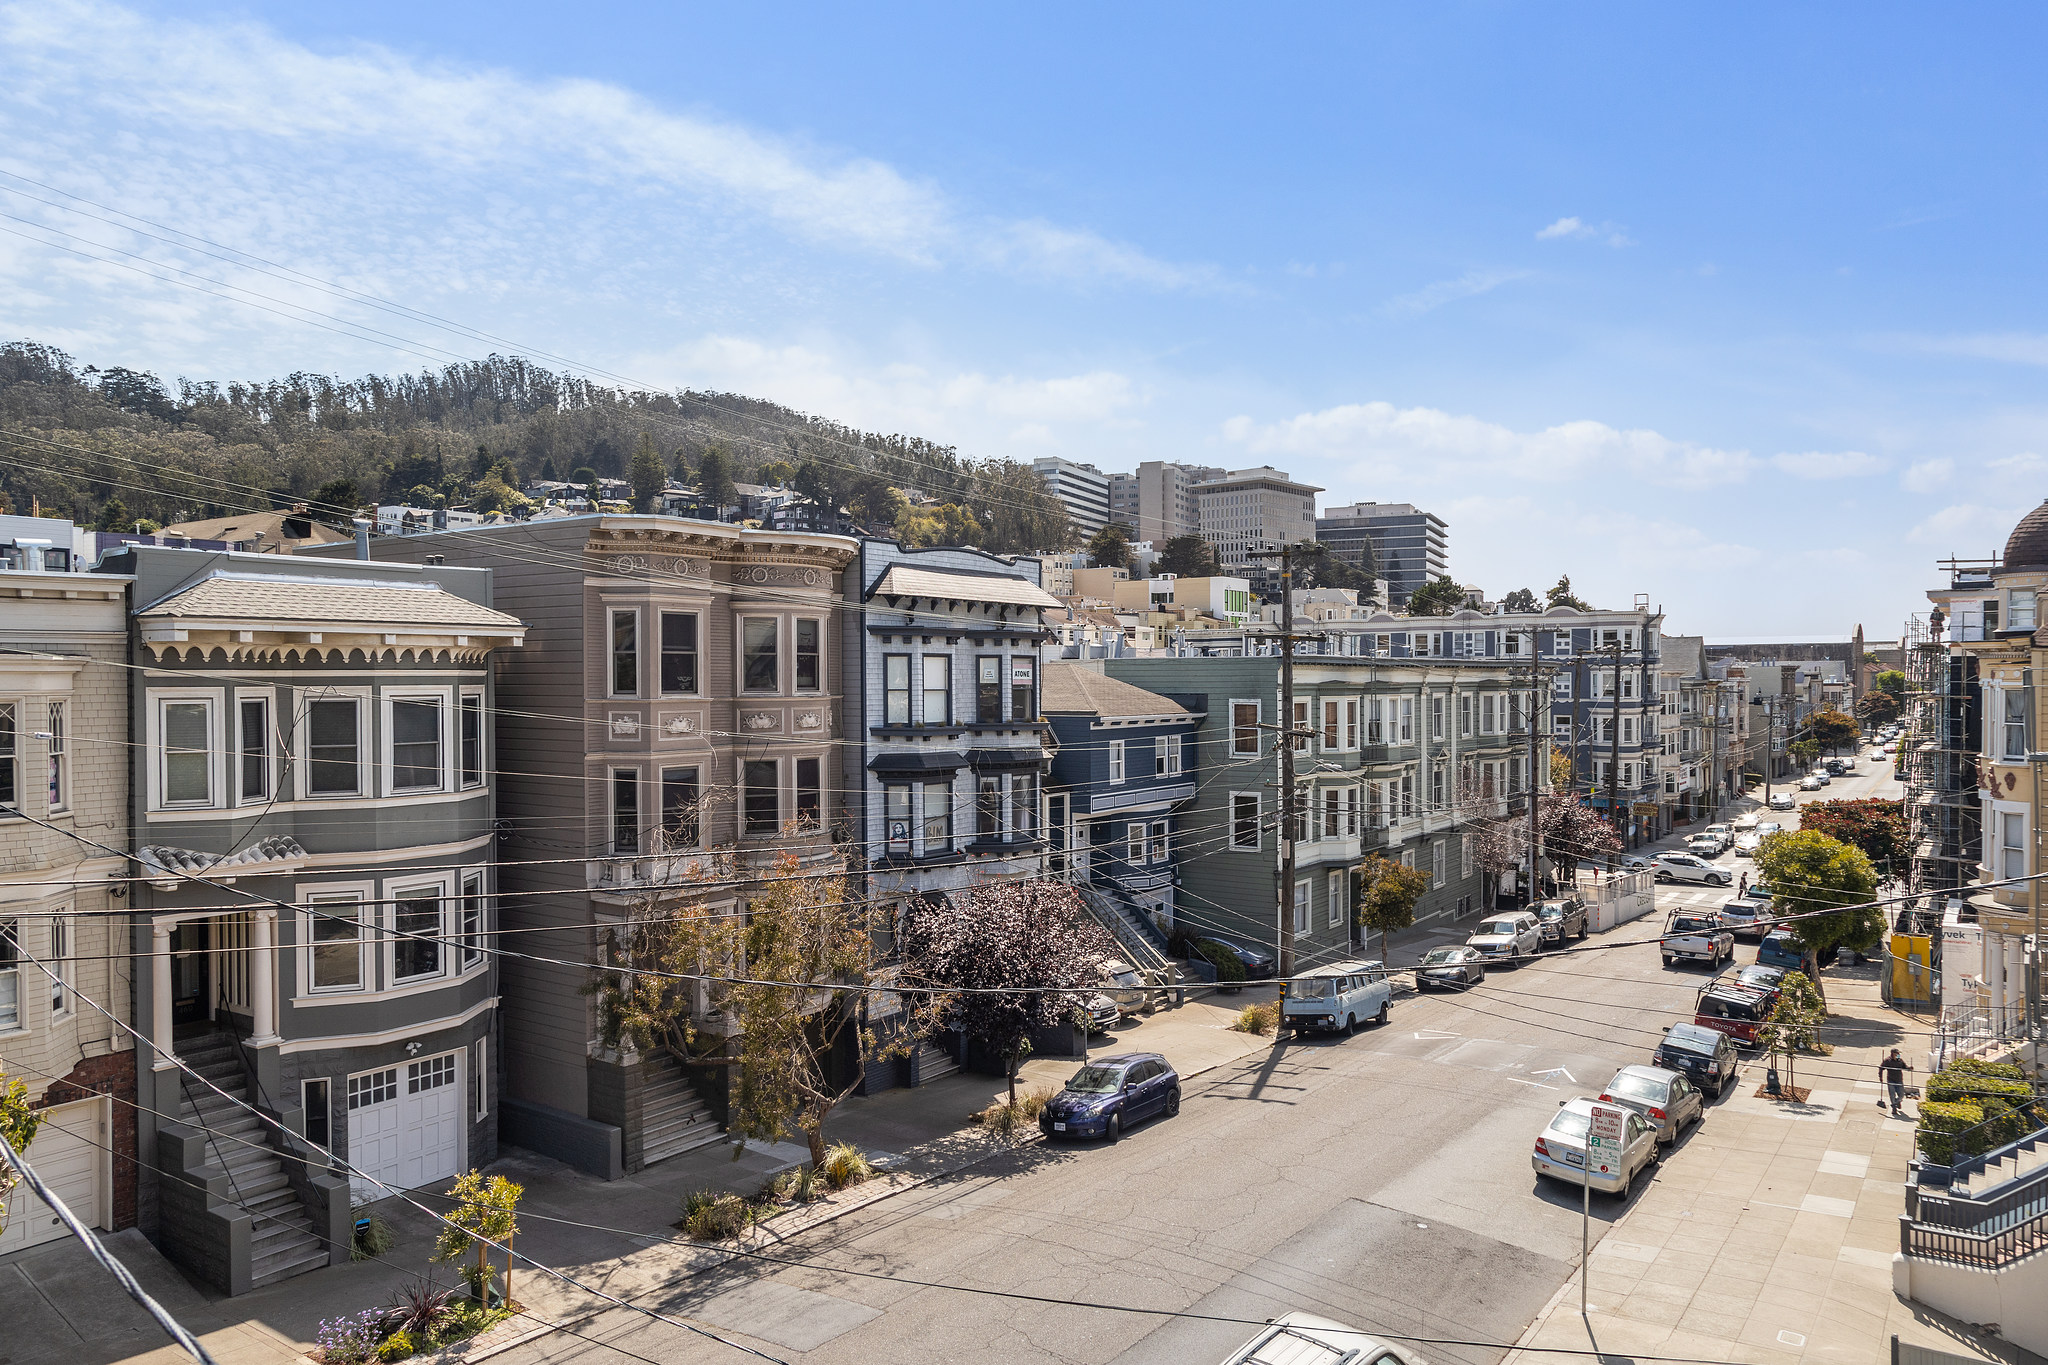 A street lined with three story houses in San Francisco